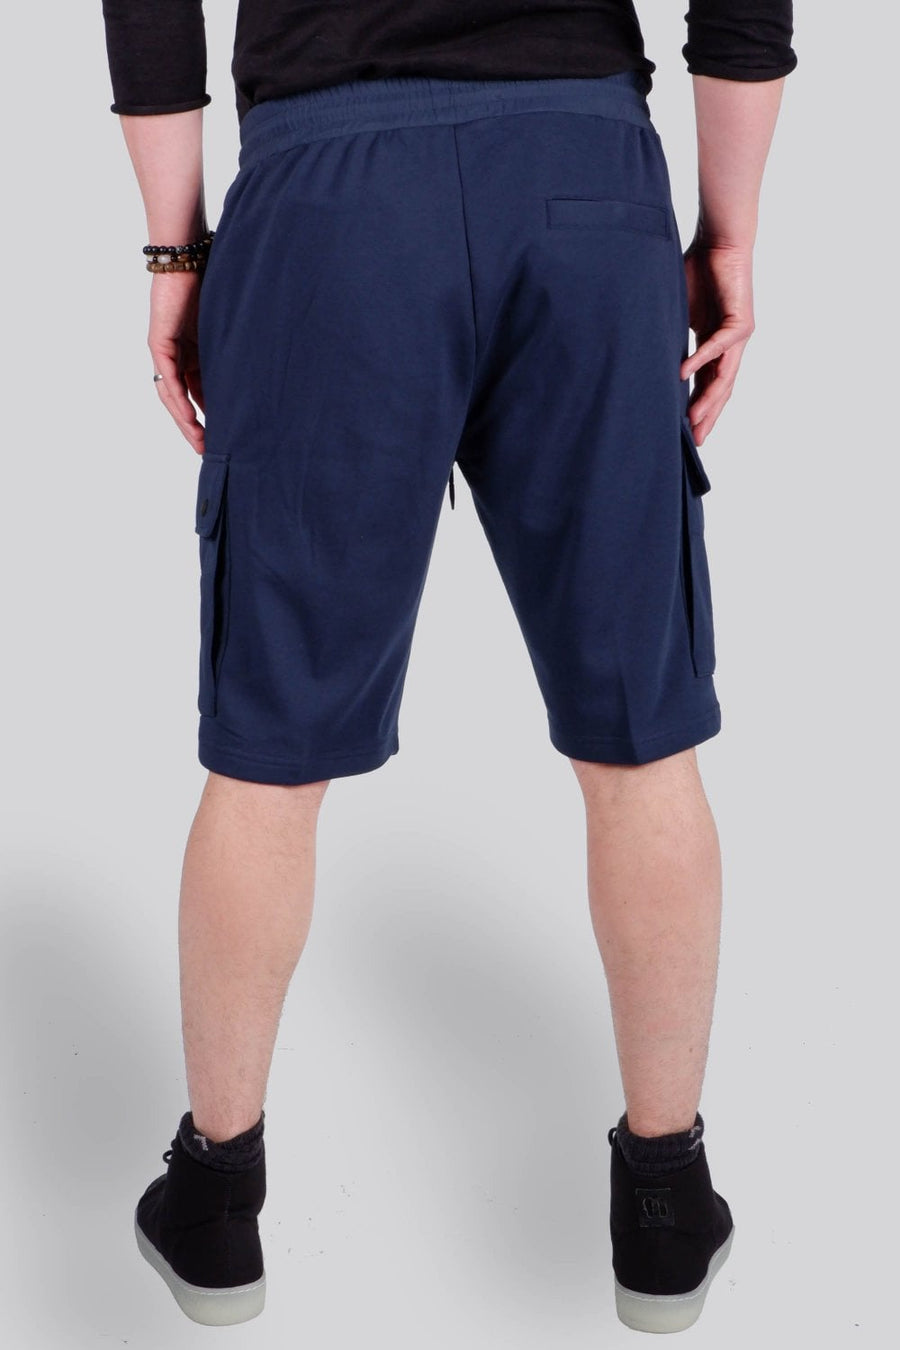 Buy the Antony Morato Cargo Jersey Shorts Navy at Intro. Spend £50 for free UK delivery. Official stockists. We ship worldwide.